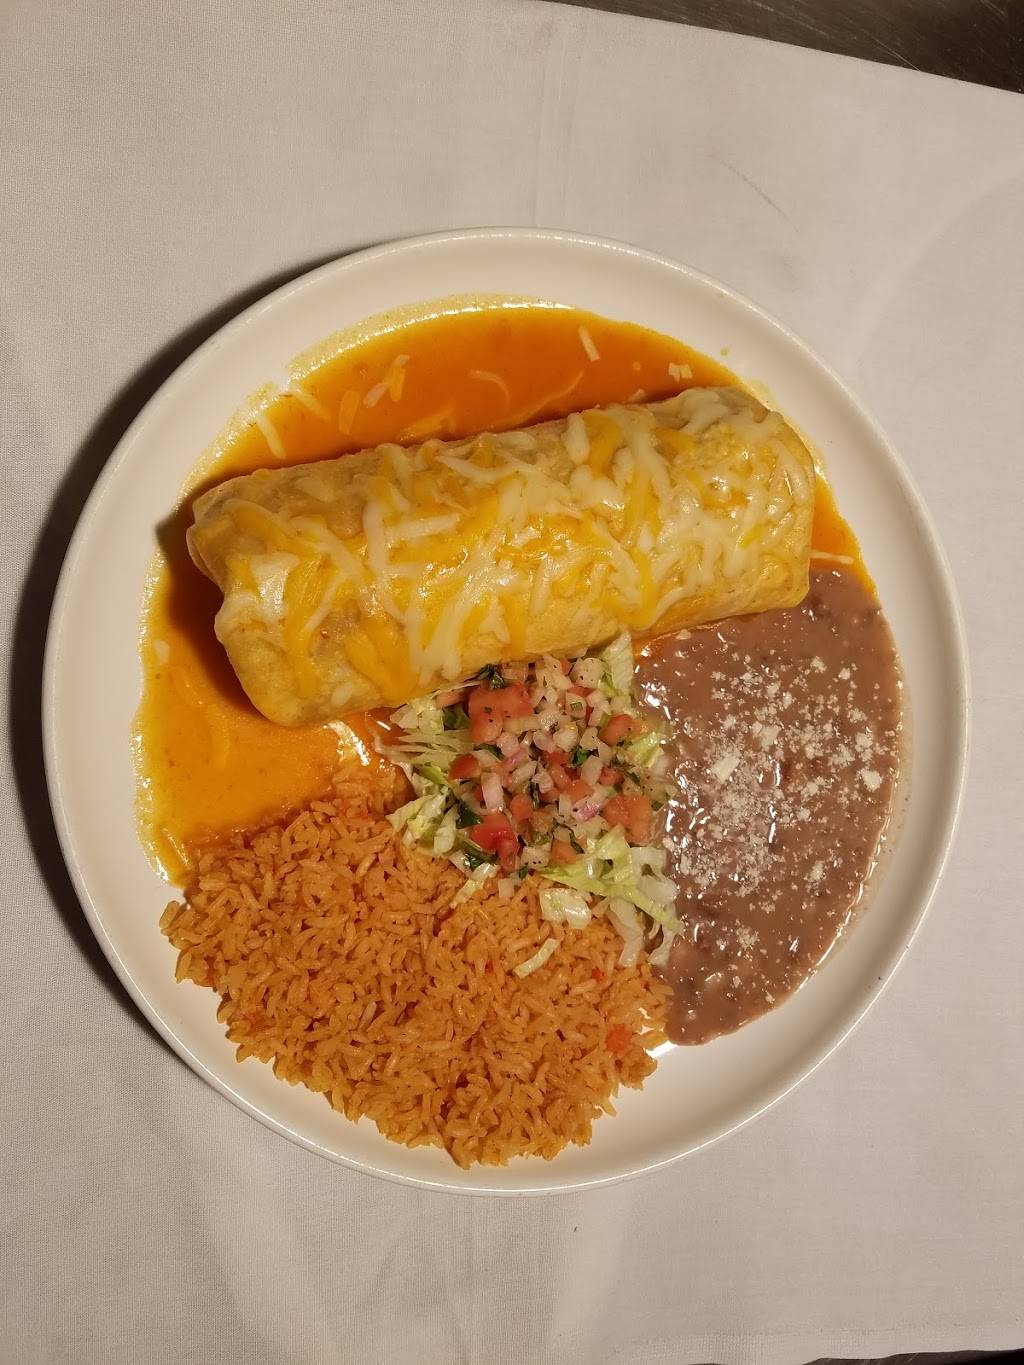 Casa Marquez Mexican Grill | restaurant | 553 N Front St, Woodburn, OR 97071, USA | 5039813219 OR +1 503-981-3219